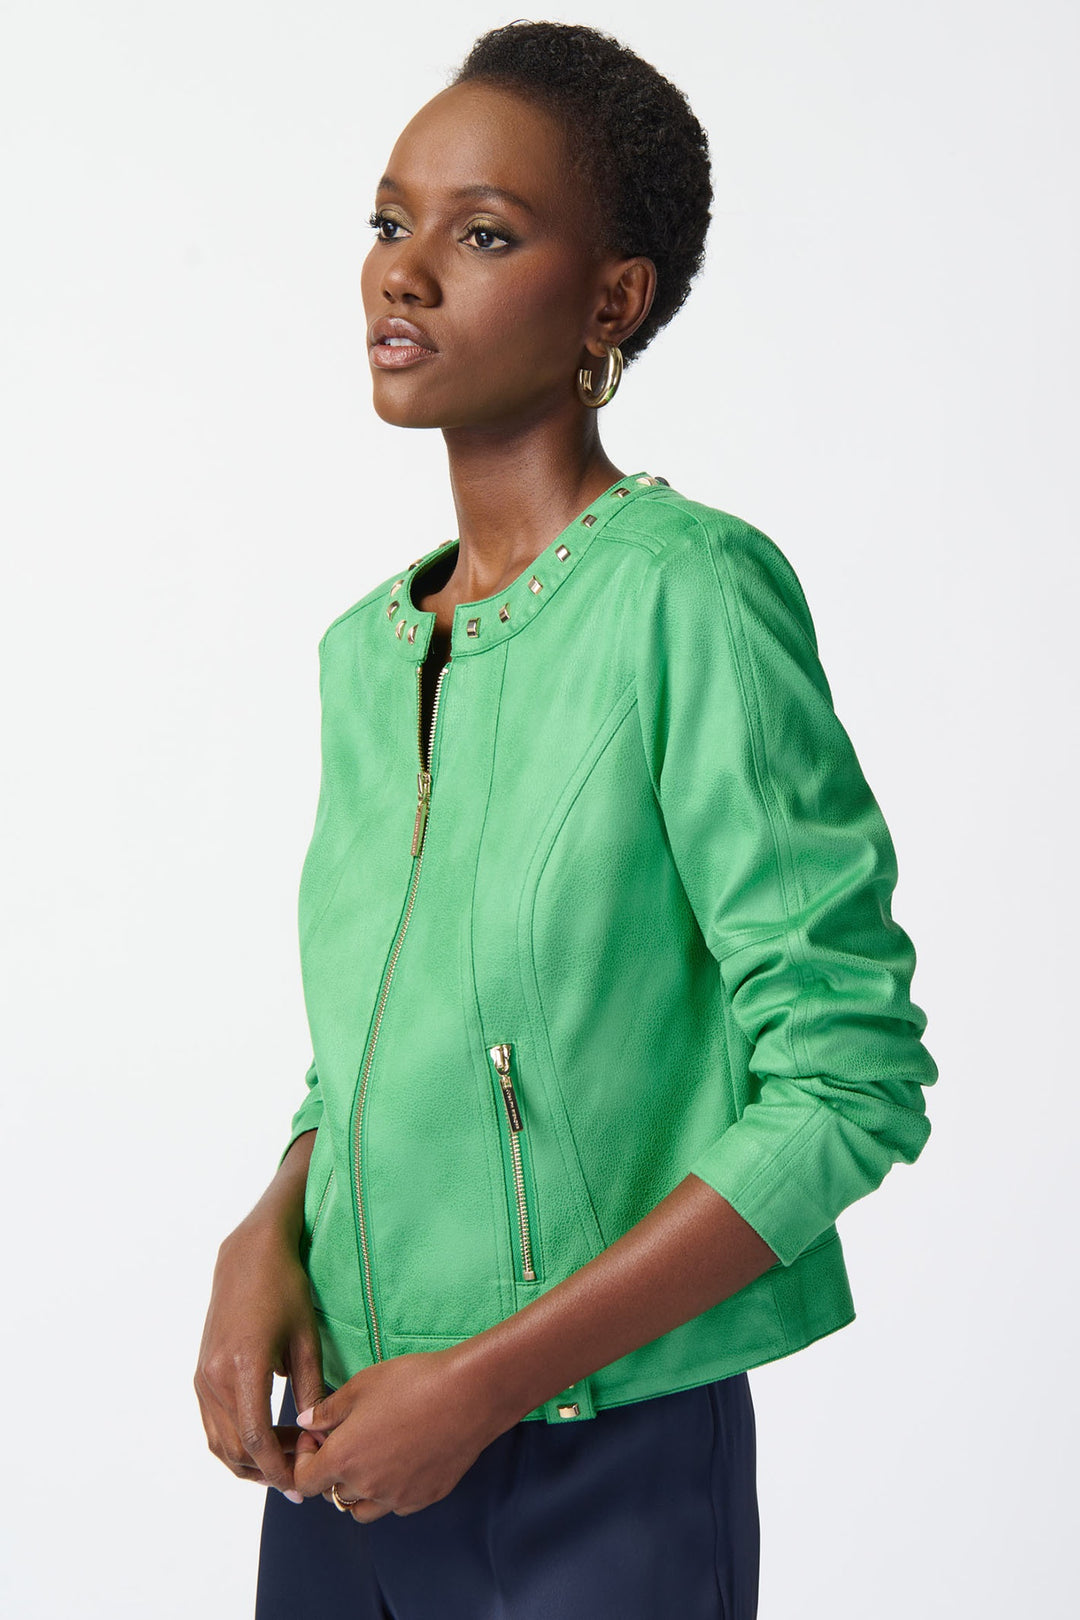 Joseph Ribkoff 241909 Island Green Faux Leather Zip Front Jacket - Dotique Chesterfield